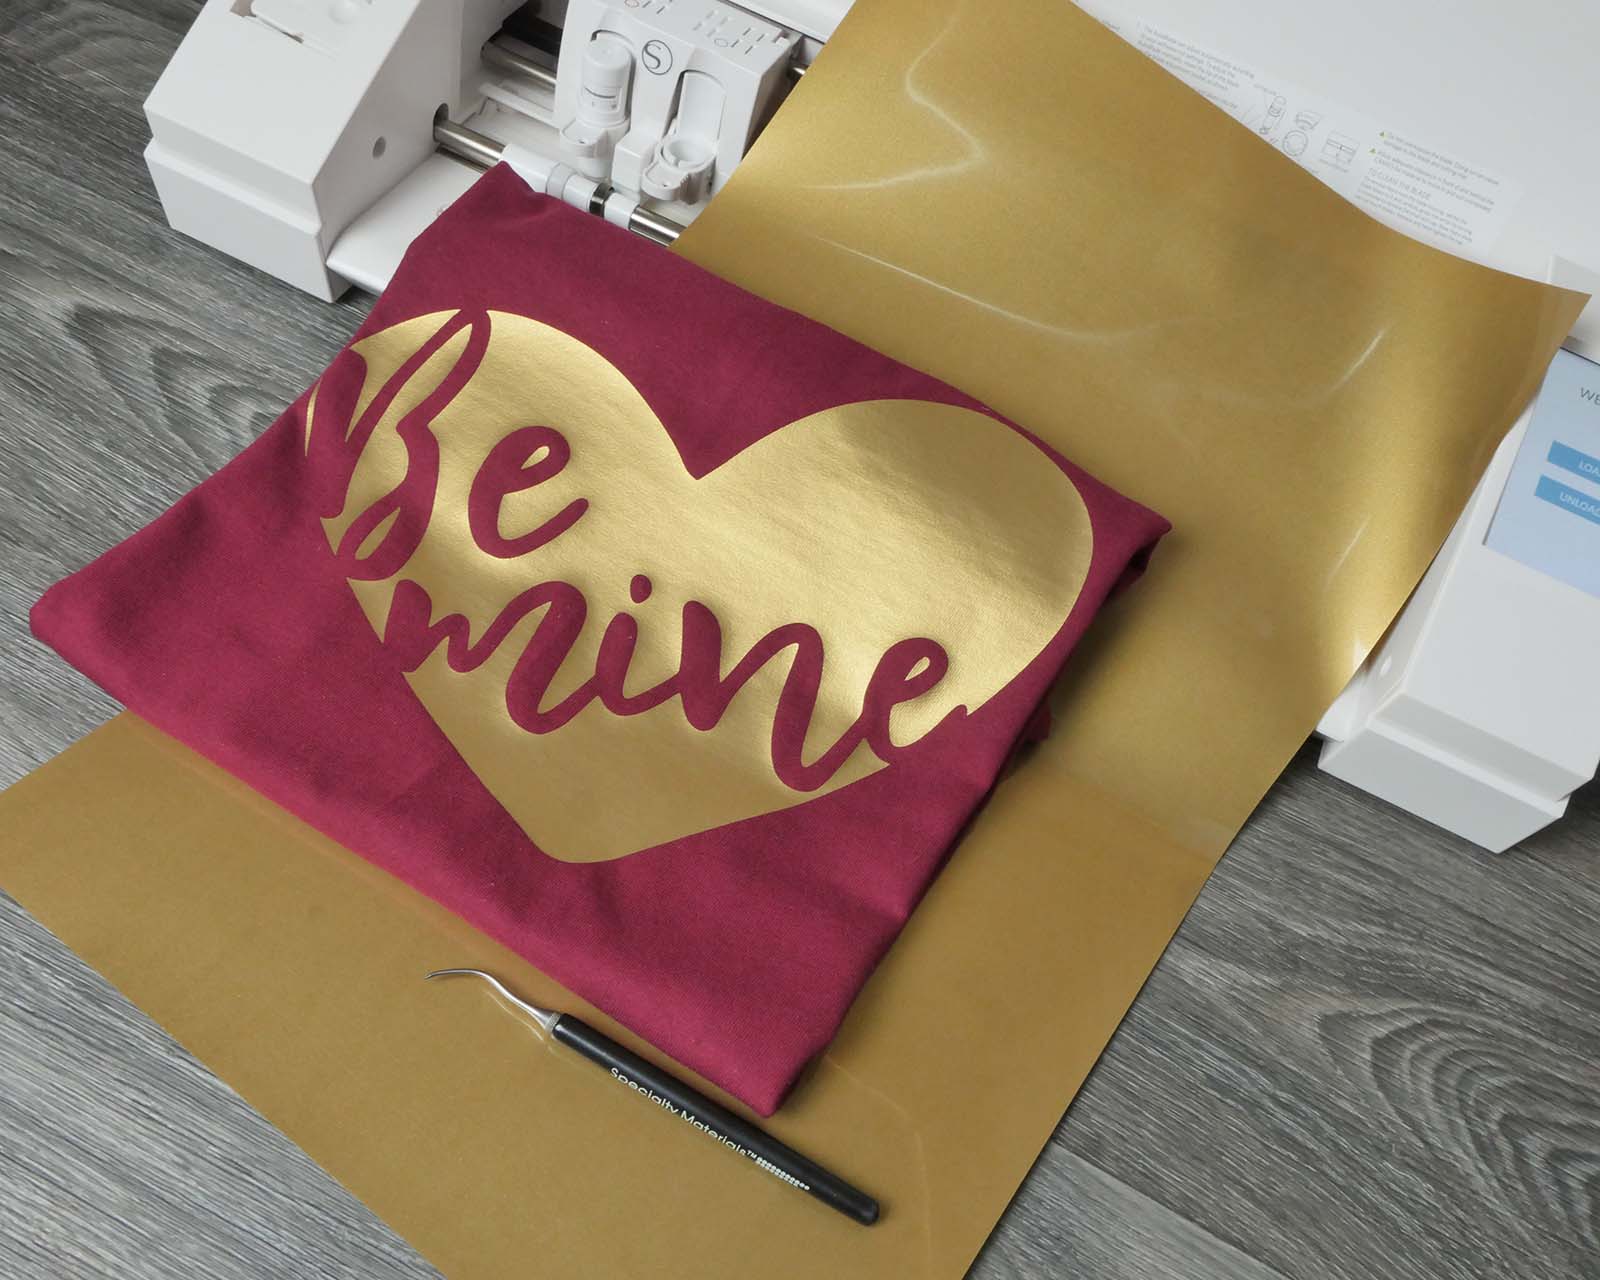 A shirt with a design that read "Be Mine" in a heart made with Dark Gold ThermoFlex Plus laying on top of a Silhouette Cameo 3.